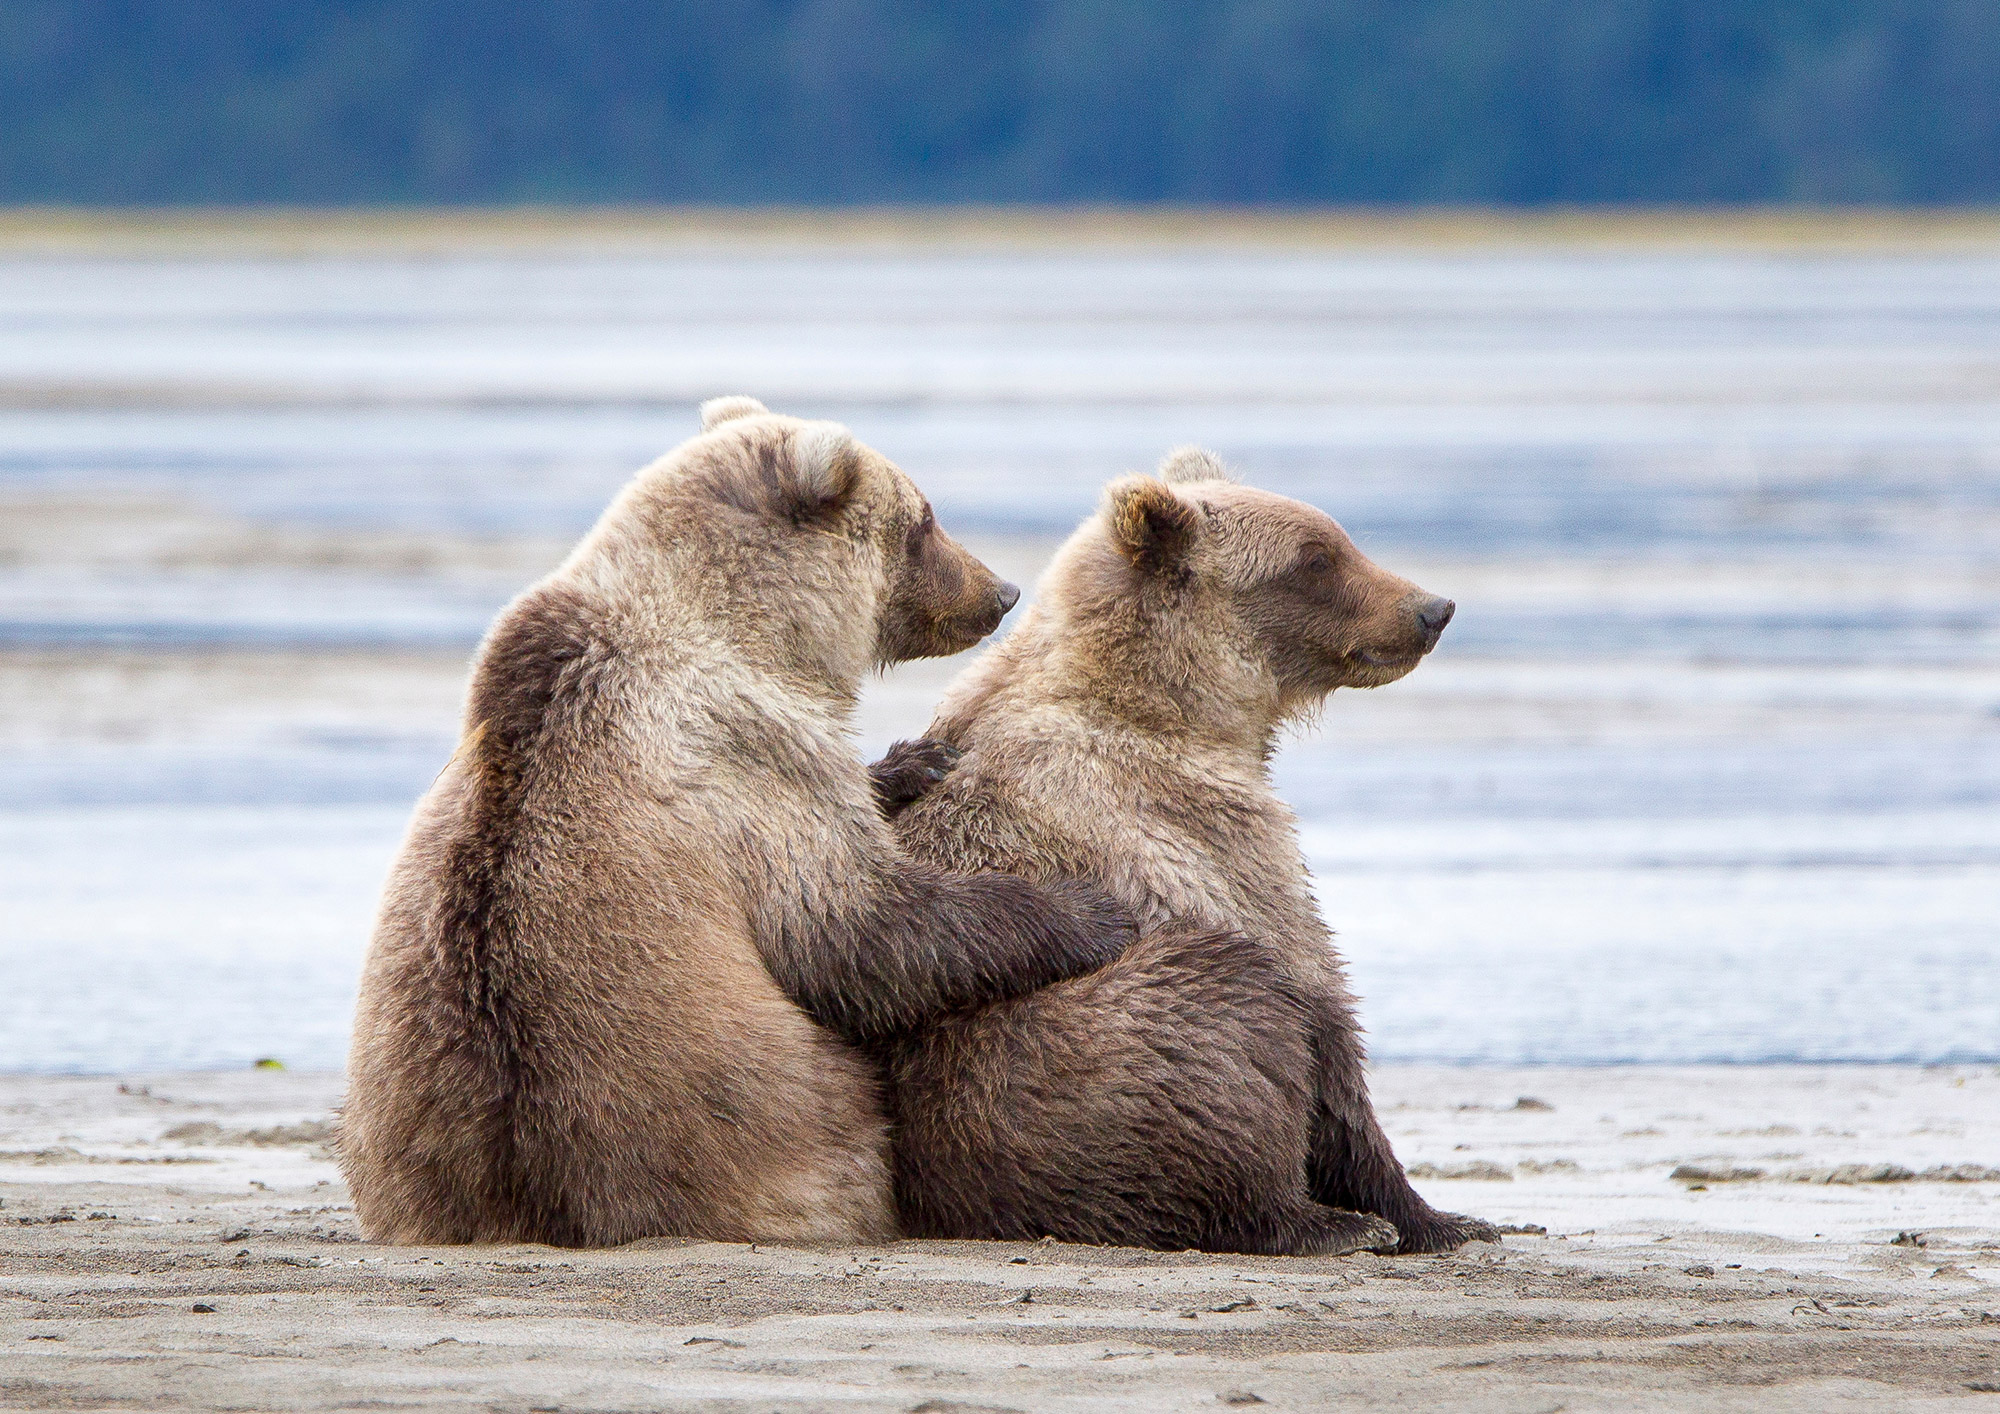 There's one market analyst who thinks a bear market is ahead